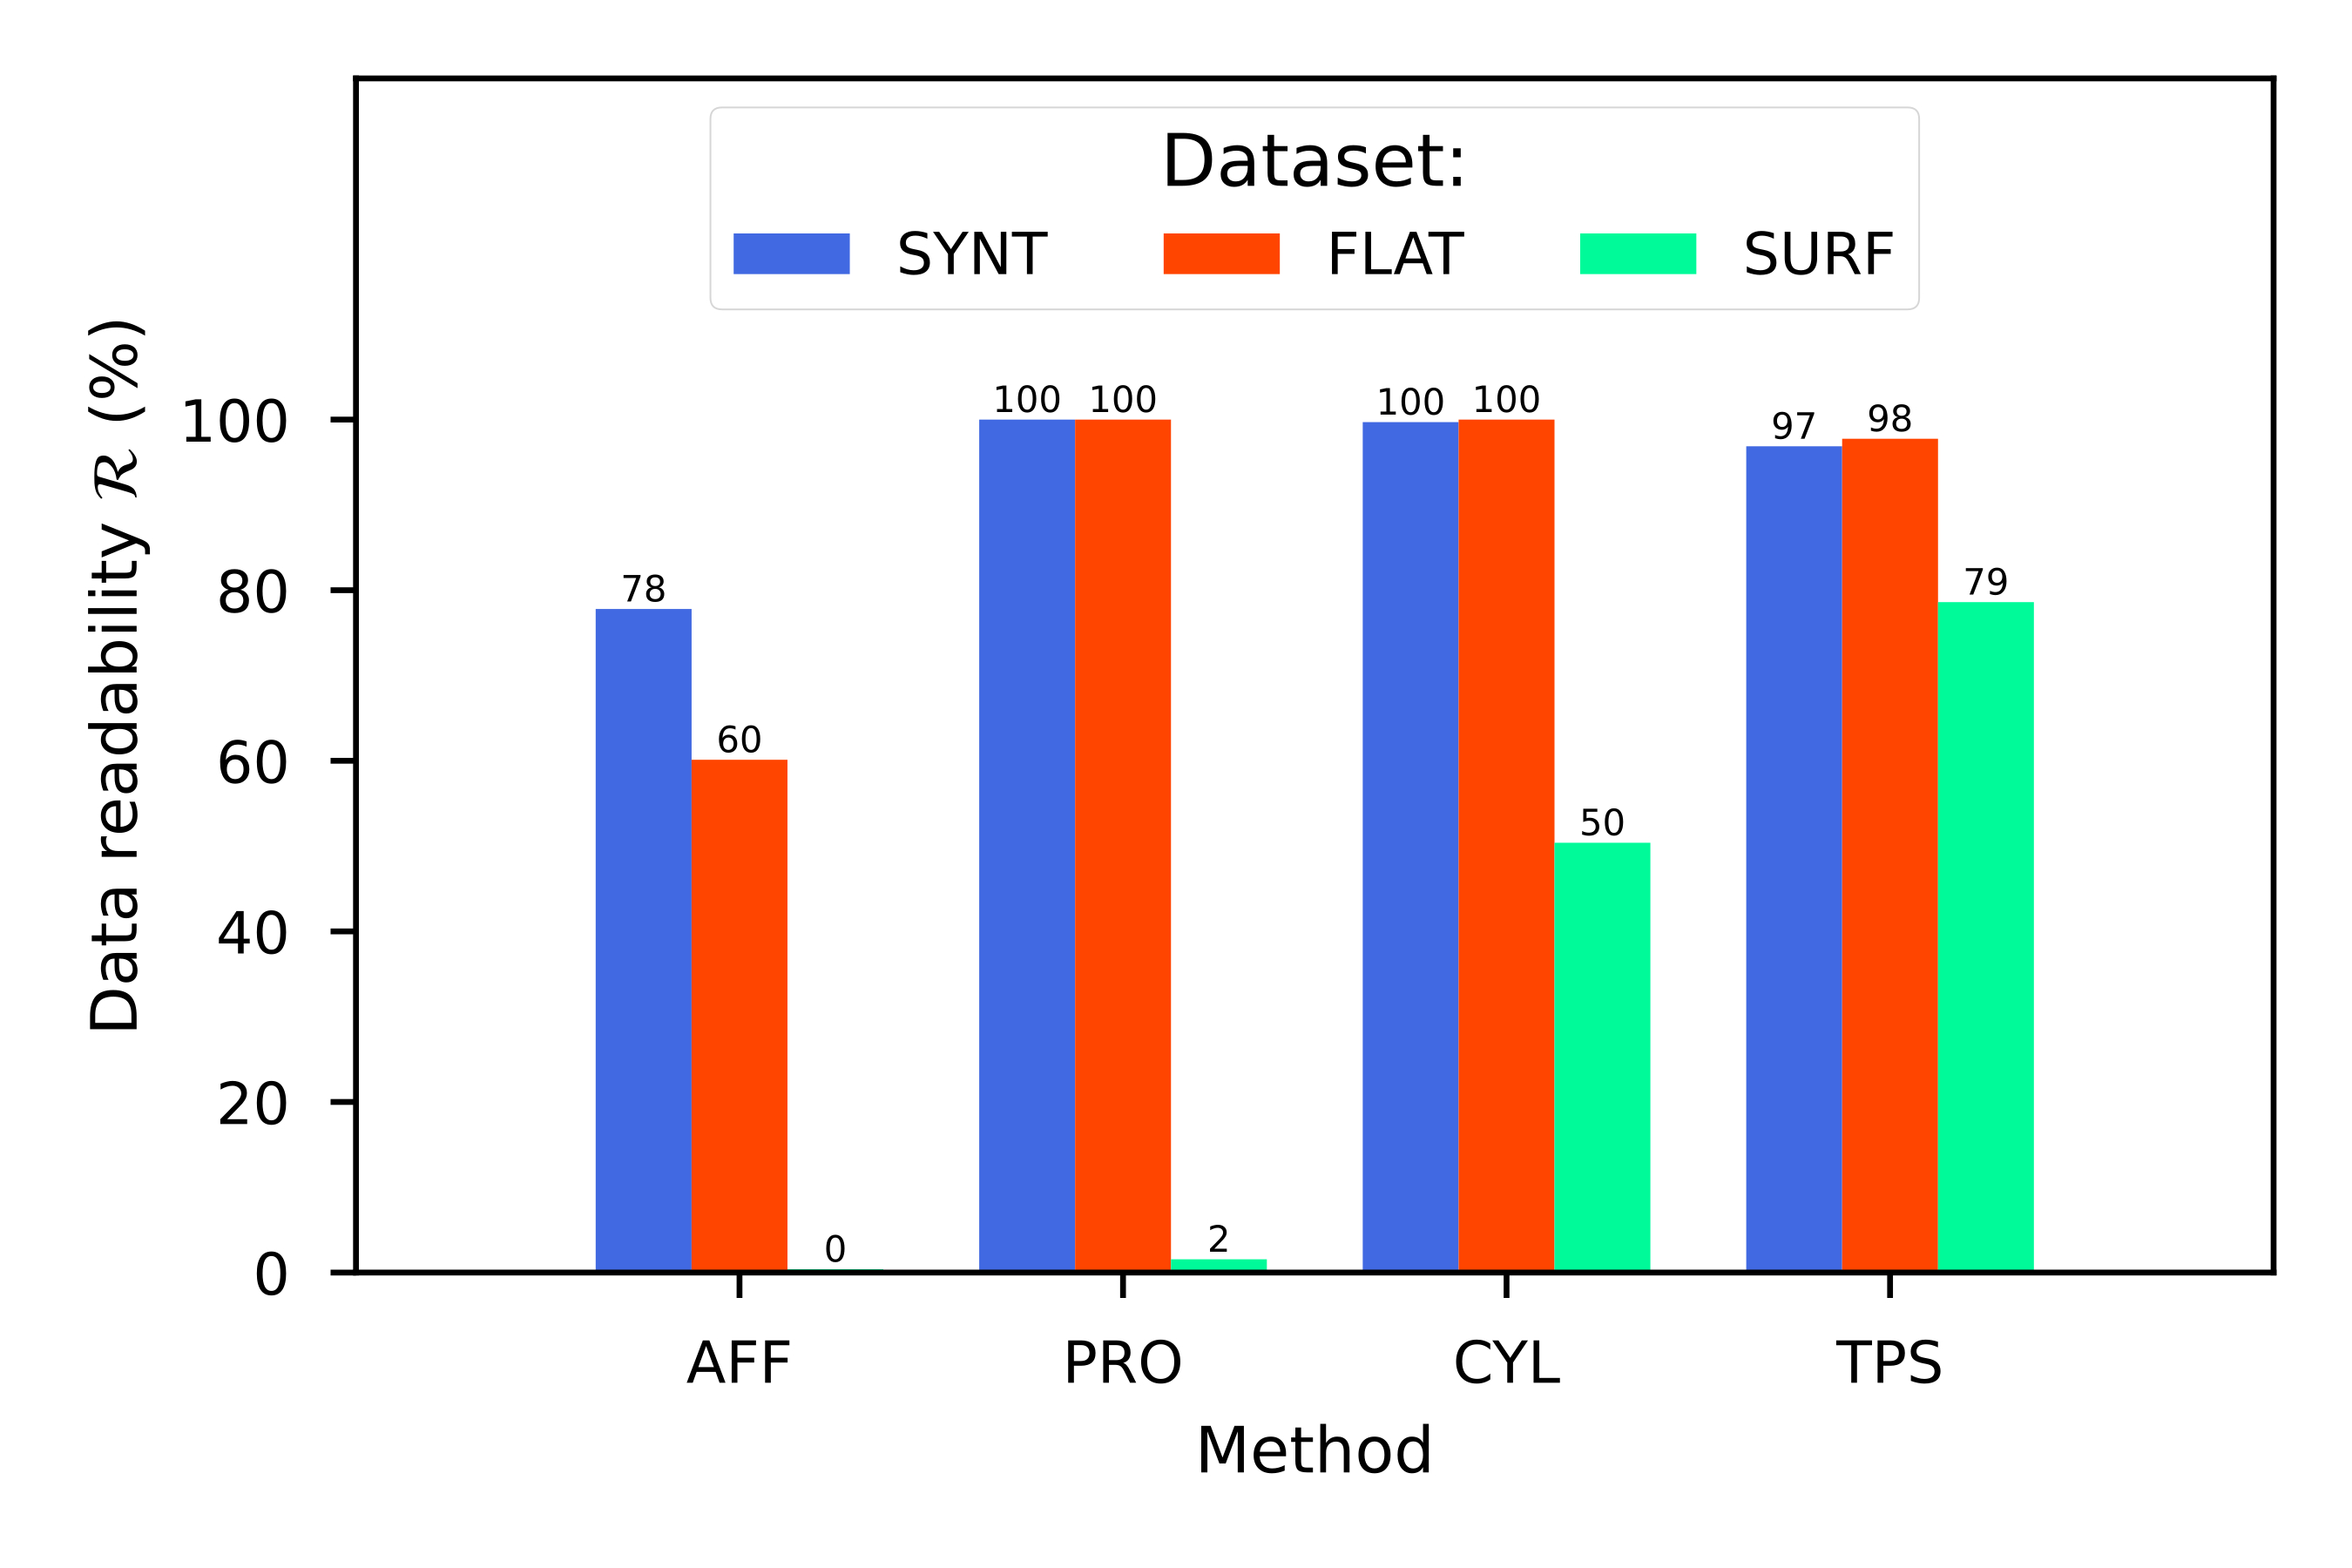 Data readability (\mathcal{R}) of each dataset (SYNT, FLAT, SURF) for each transformation method (AFF, PRO, CYL and TPS).